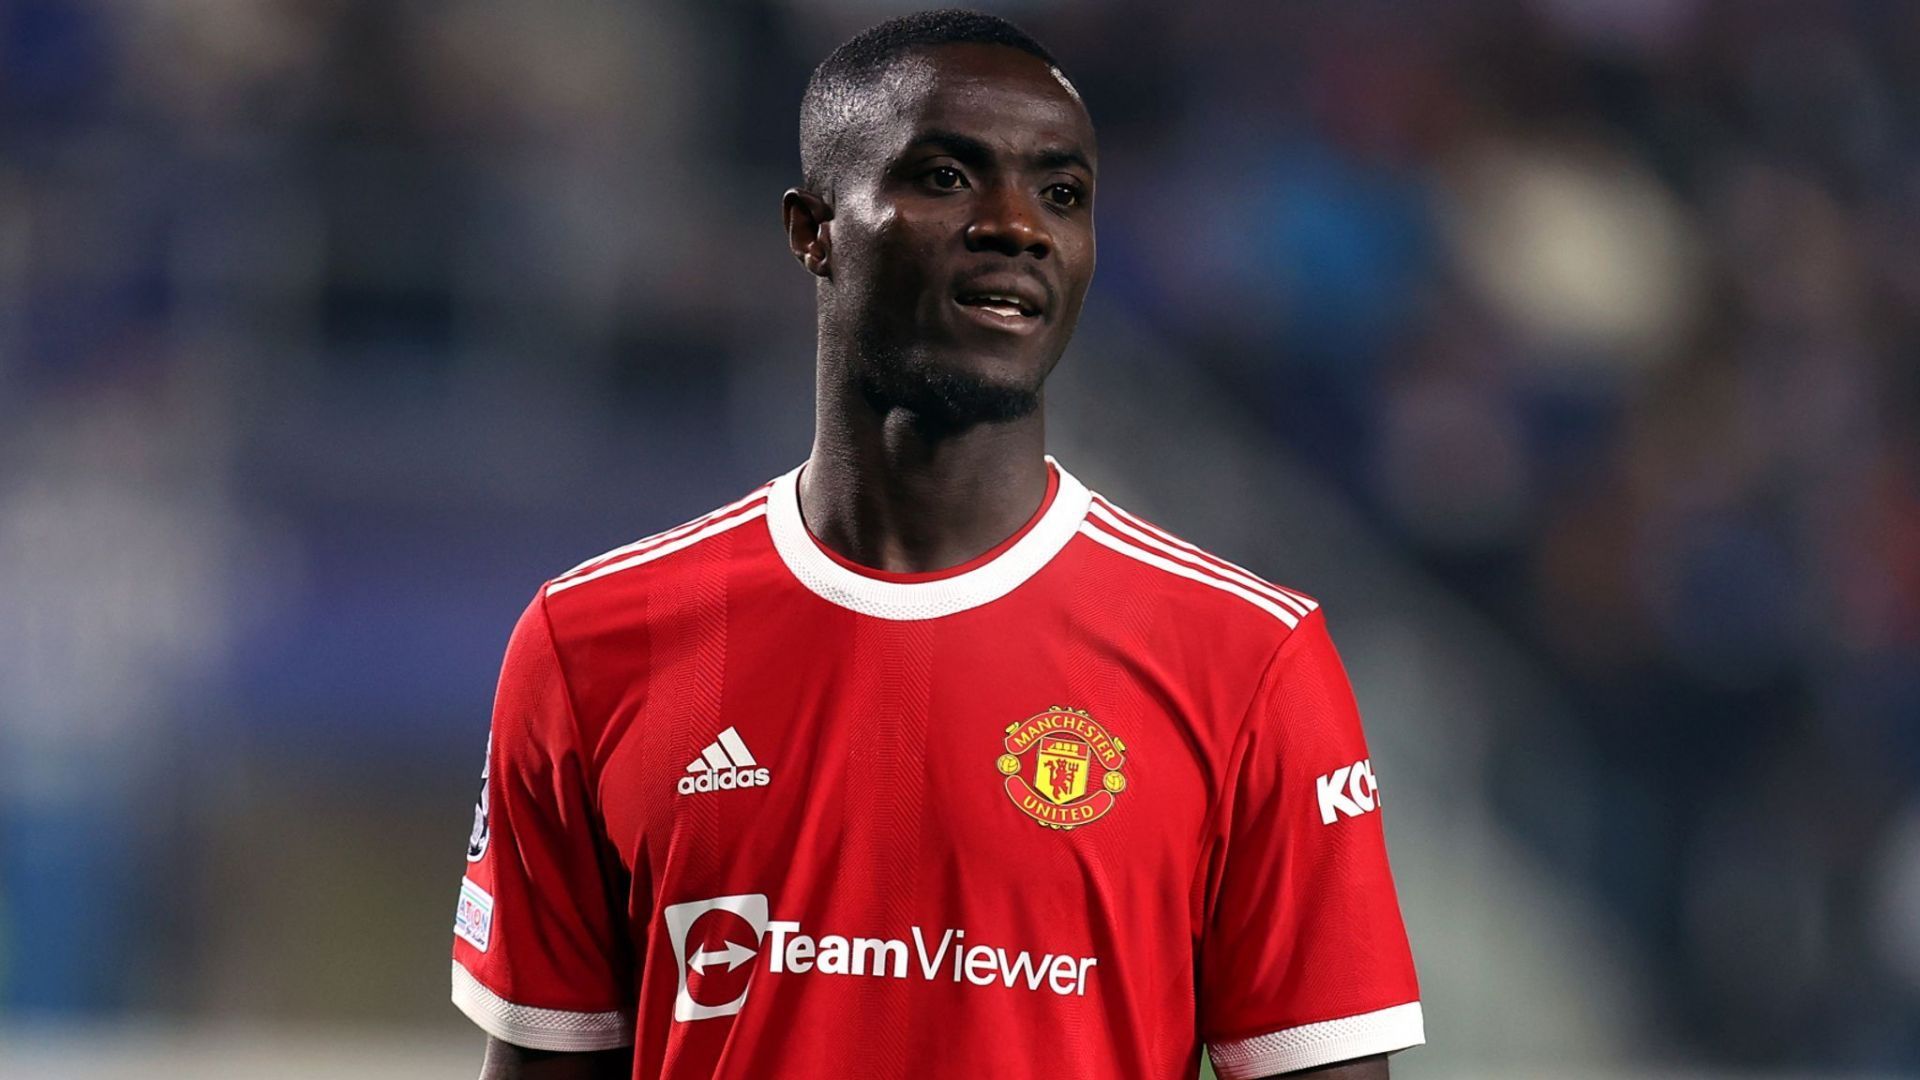 Manchester United centre-back Eric Bailly (cred: Sky Sports)